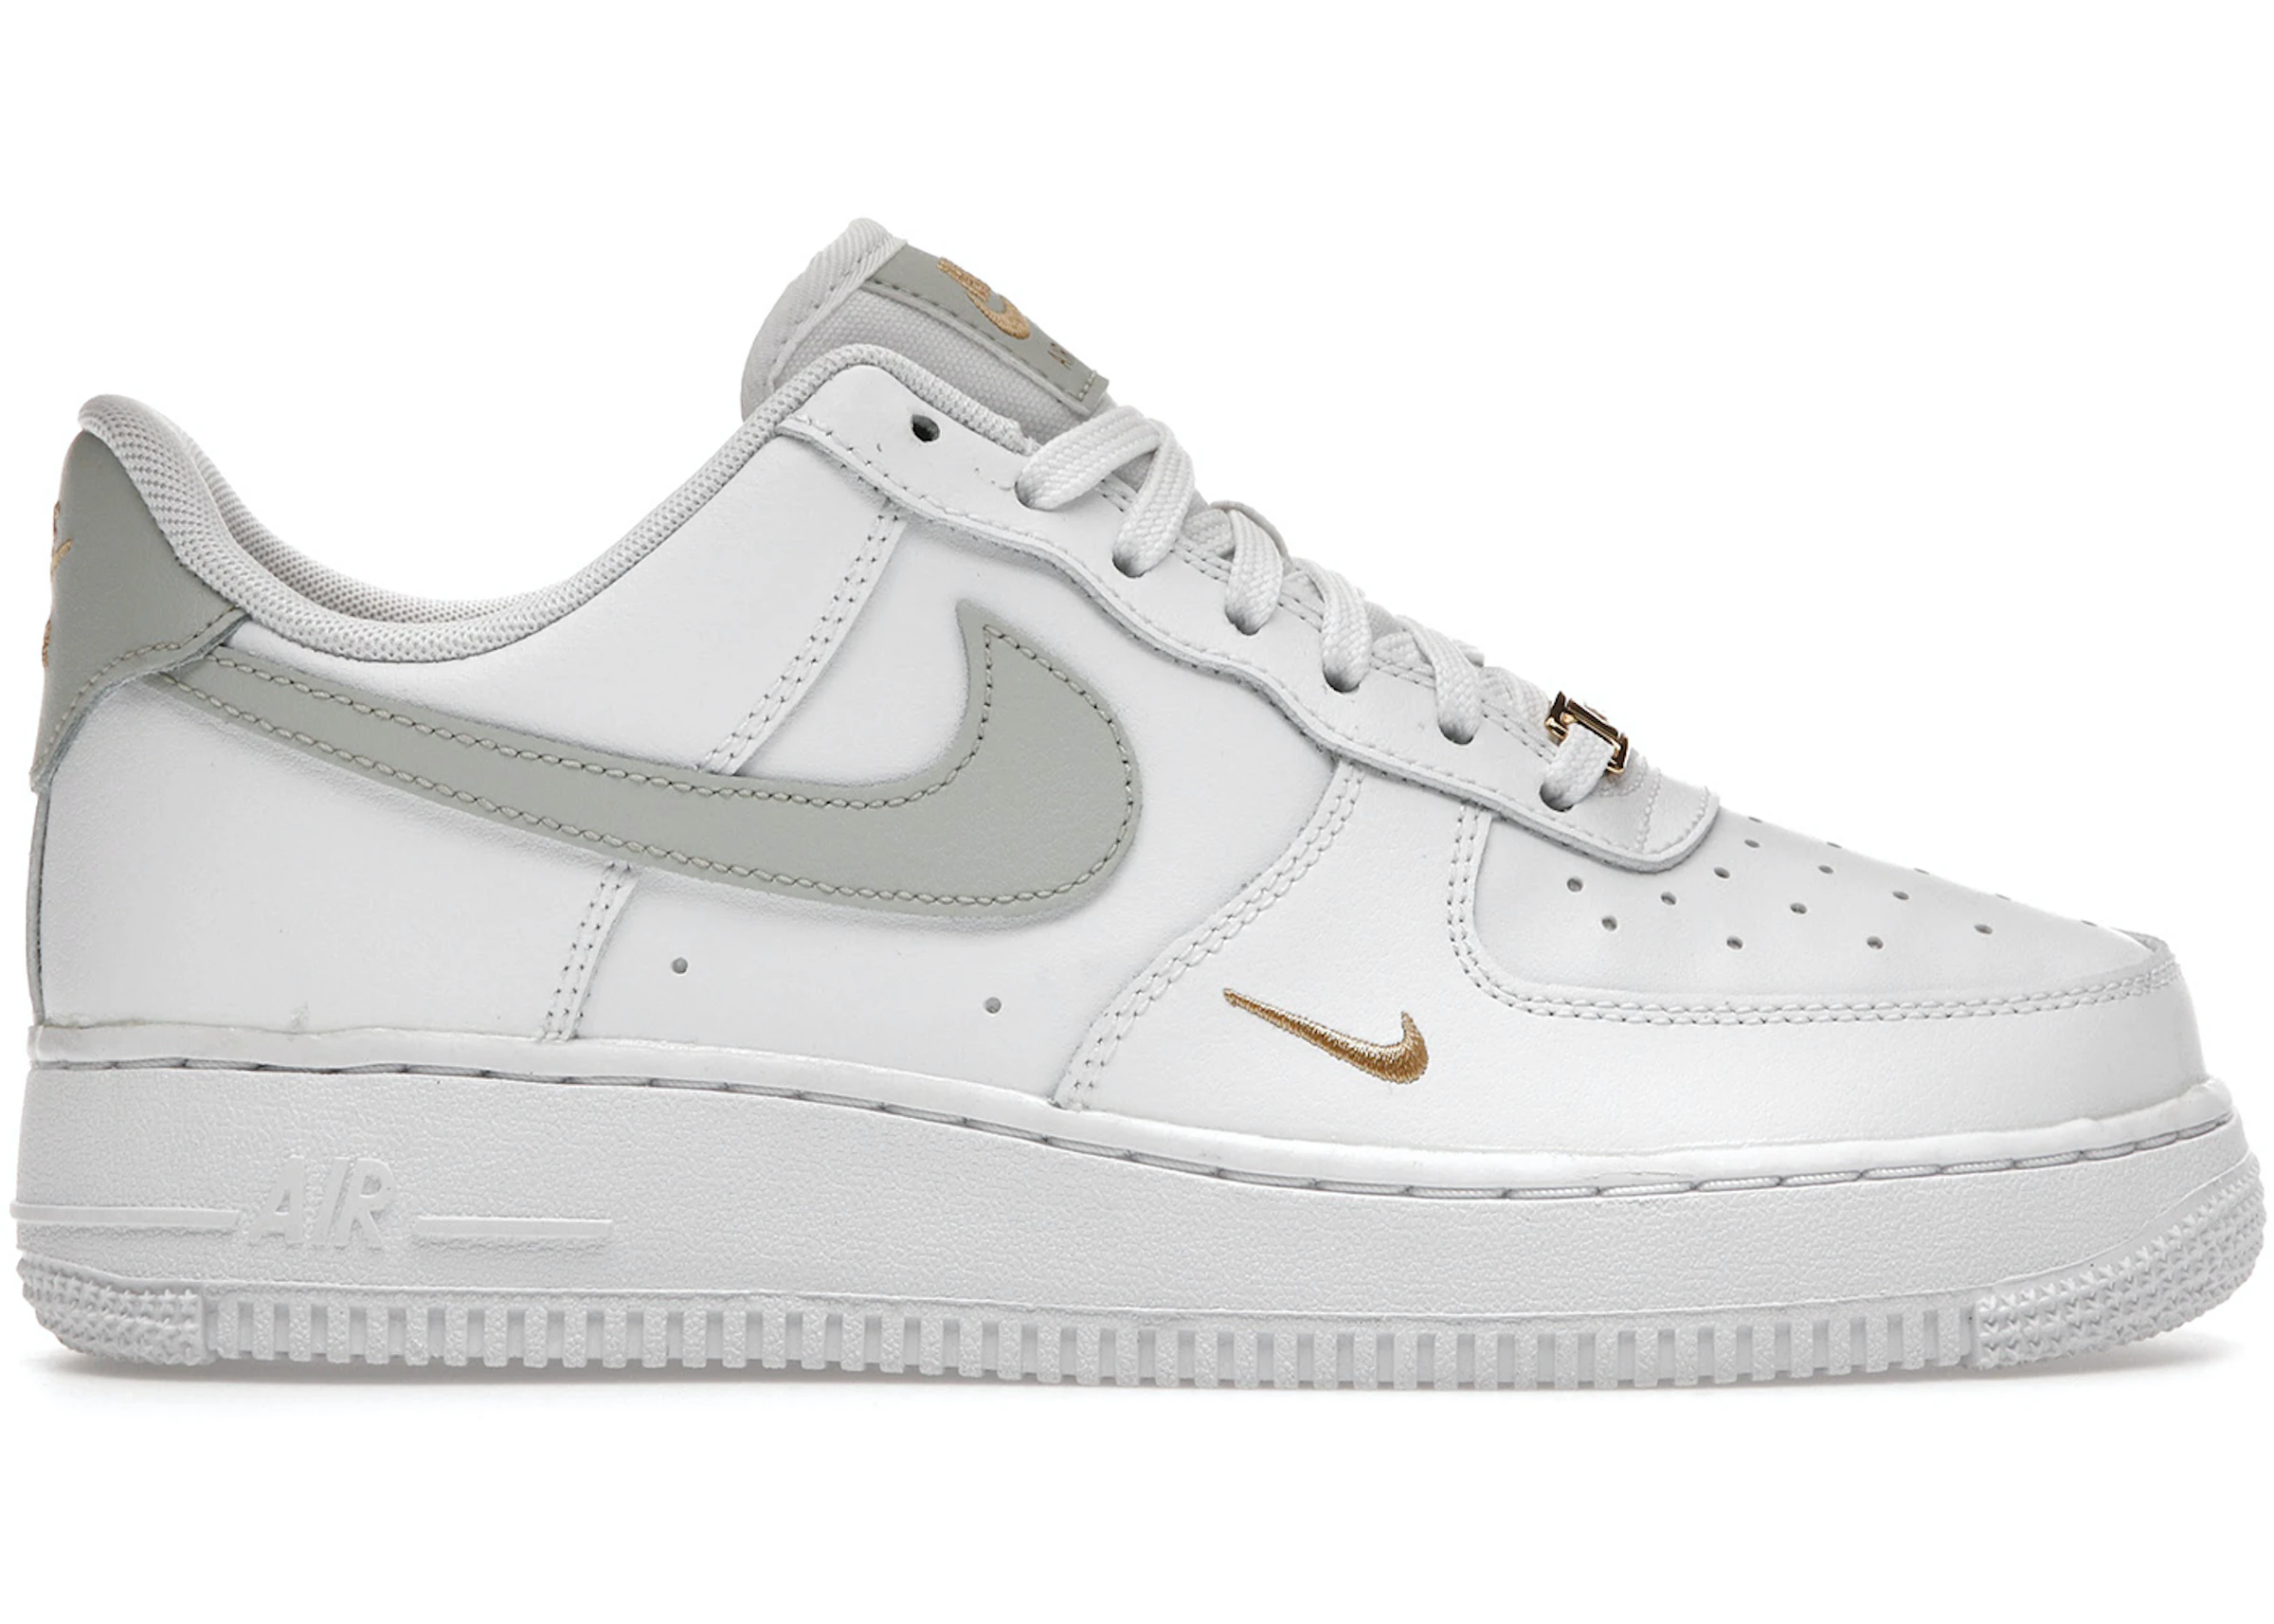 Nike Air Force 1 Low White Gold (Women's) - CZ0270-106 US